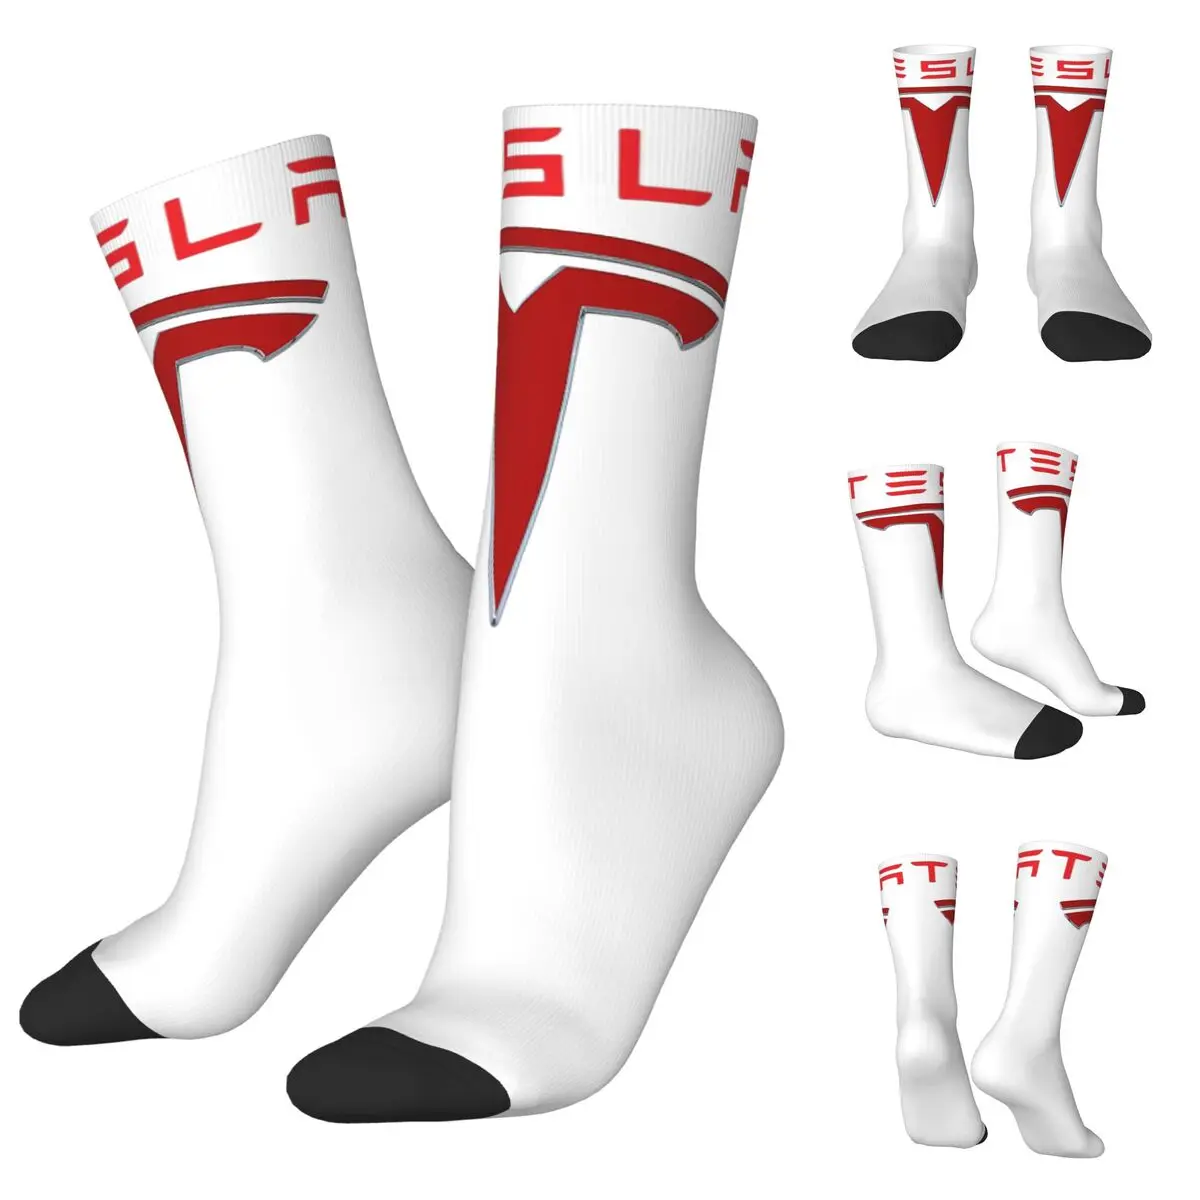 Tesla Red Logo Men and Women printing Socks,lovely Applicable throughout the year Dressing Gift 5xl animal rabbit lovely printing hoodie women men fashion casual clothing autumn warm fleece sweatshirts oversize loose hooded